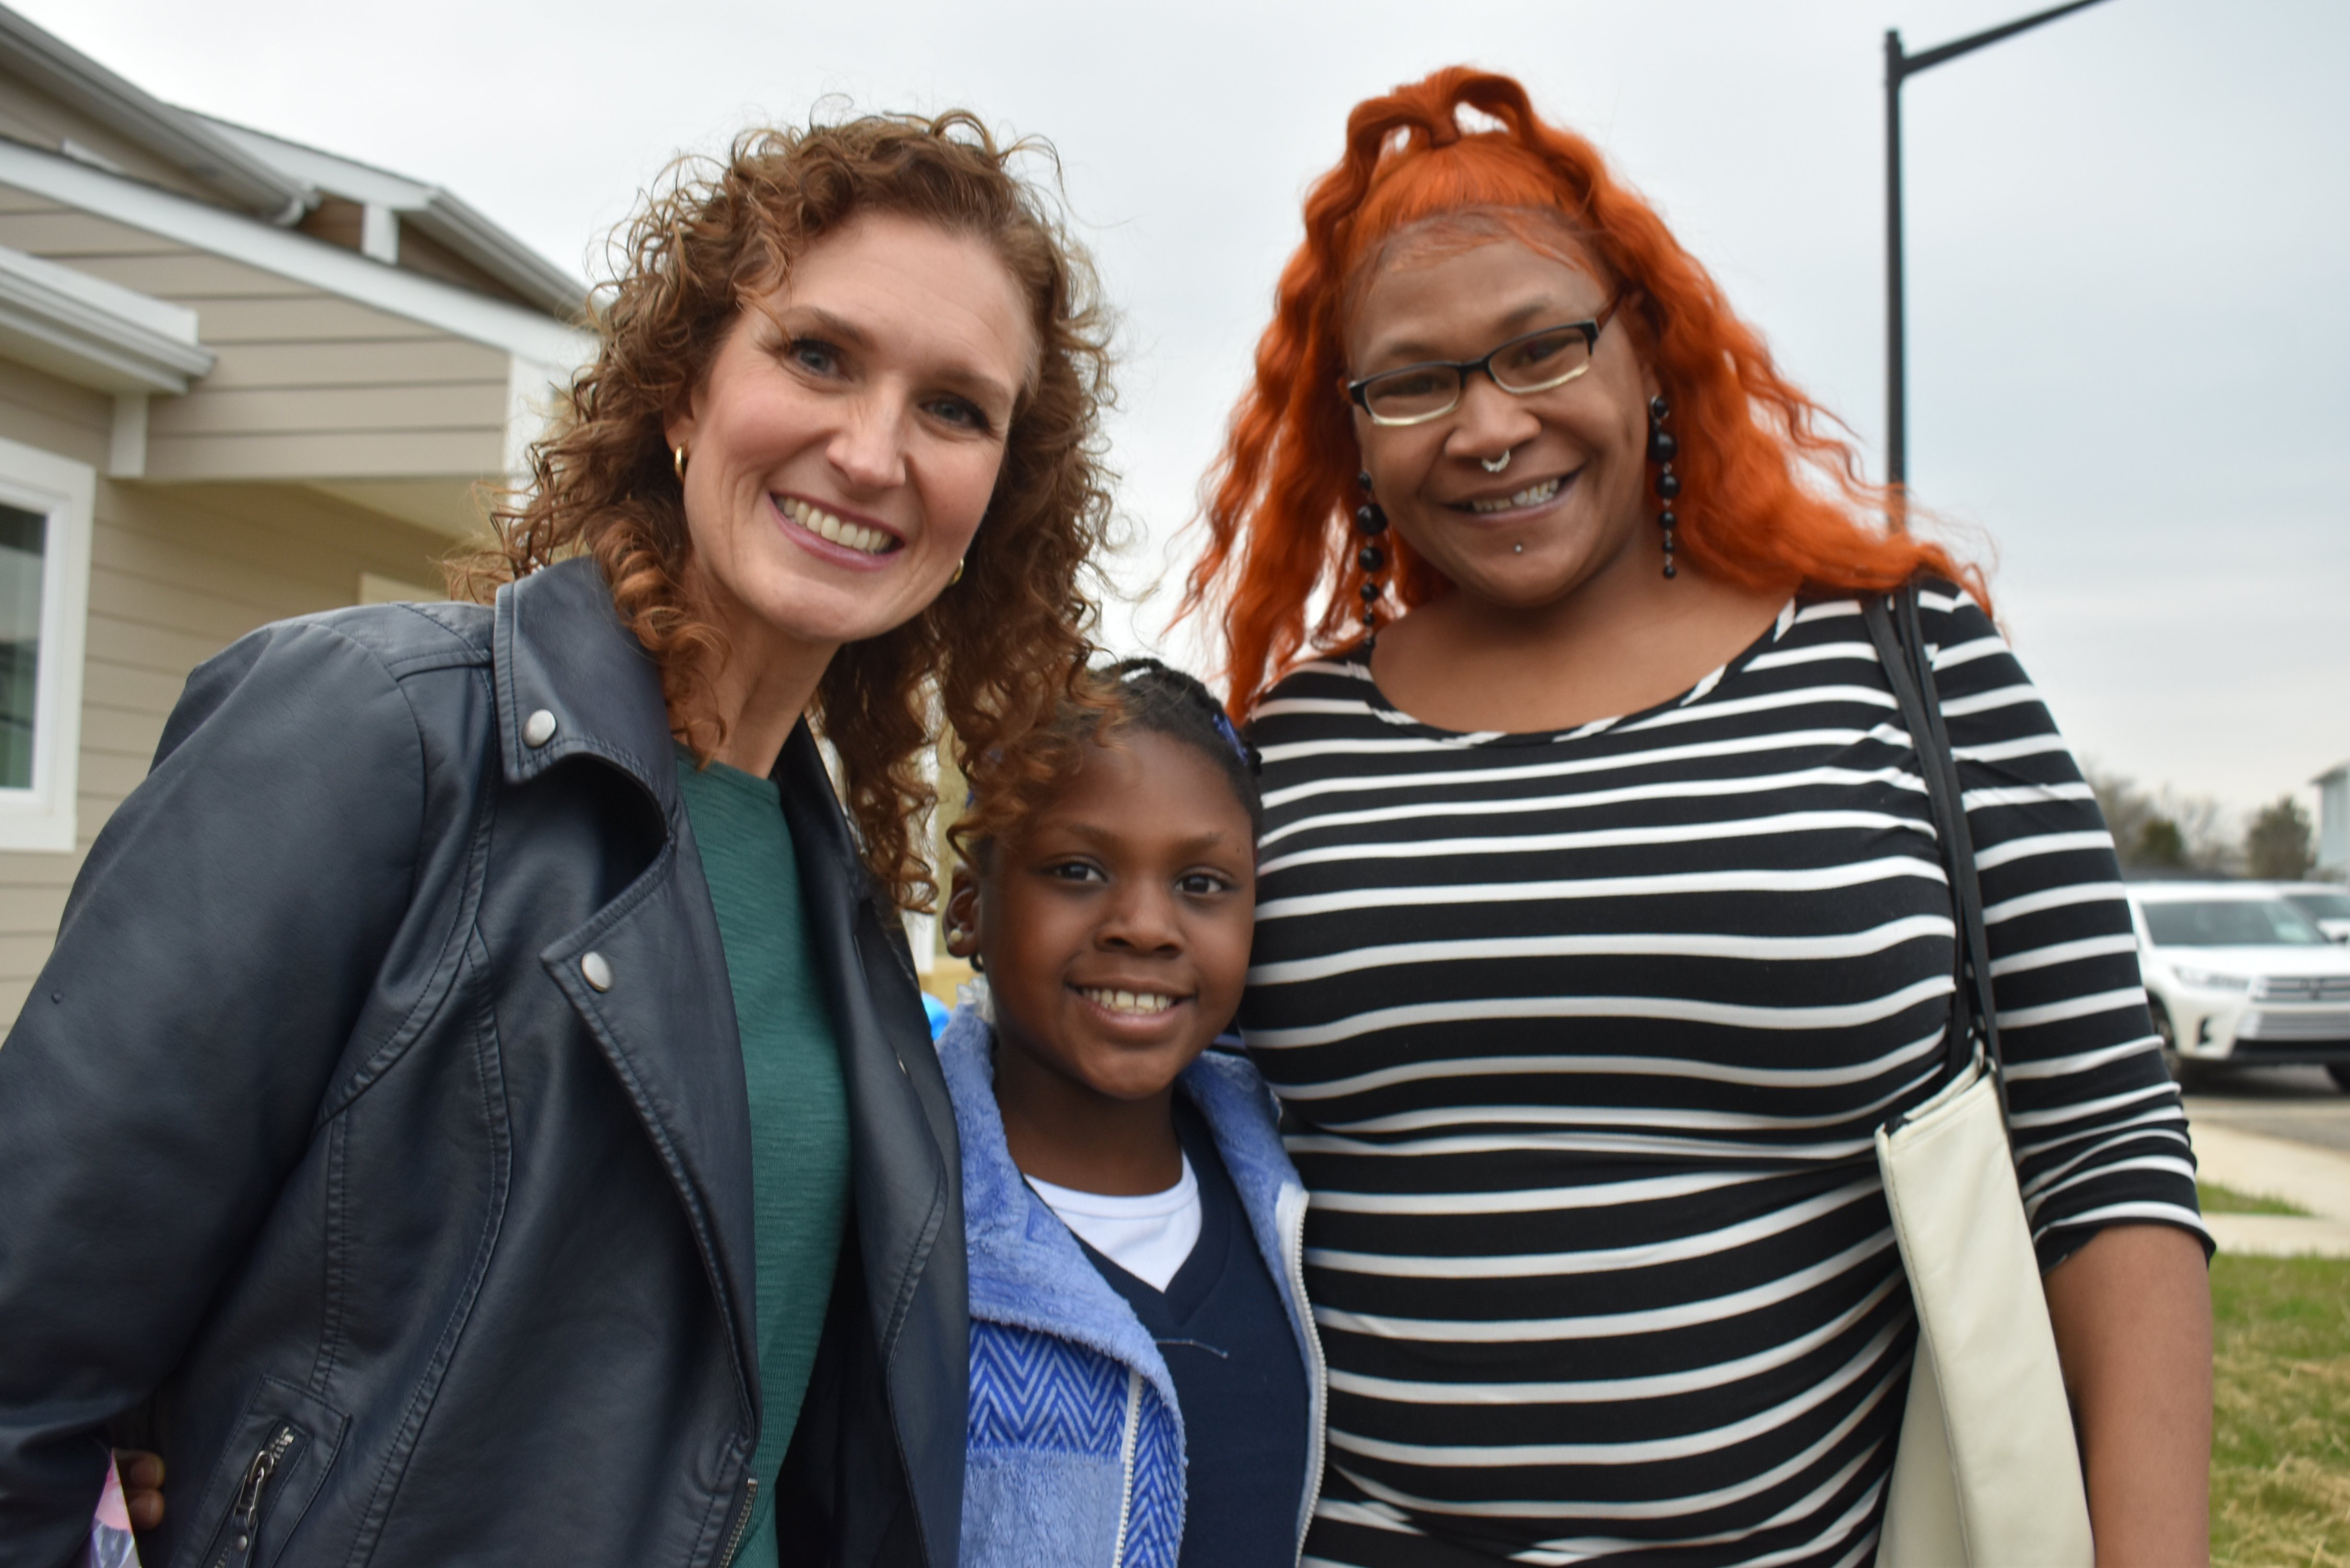 KHC's Keli Reynolds poses with new homeowners